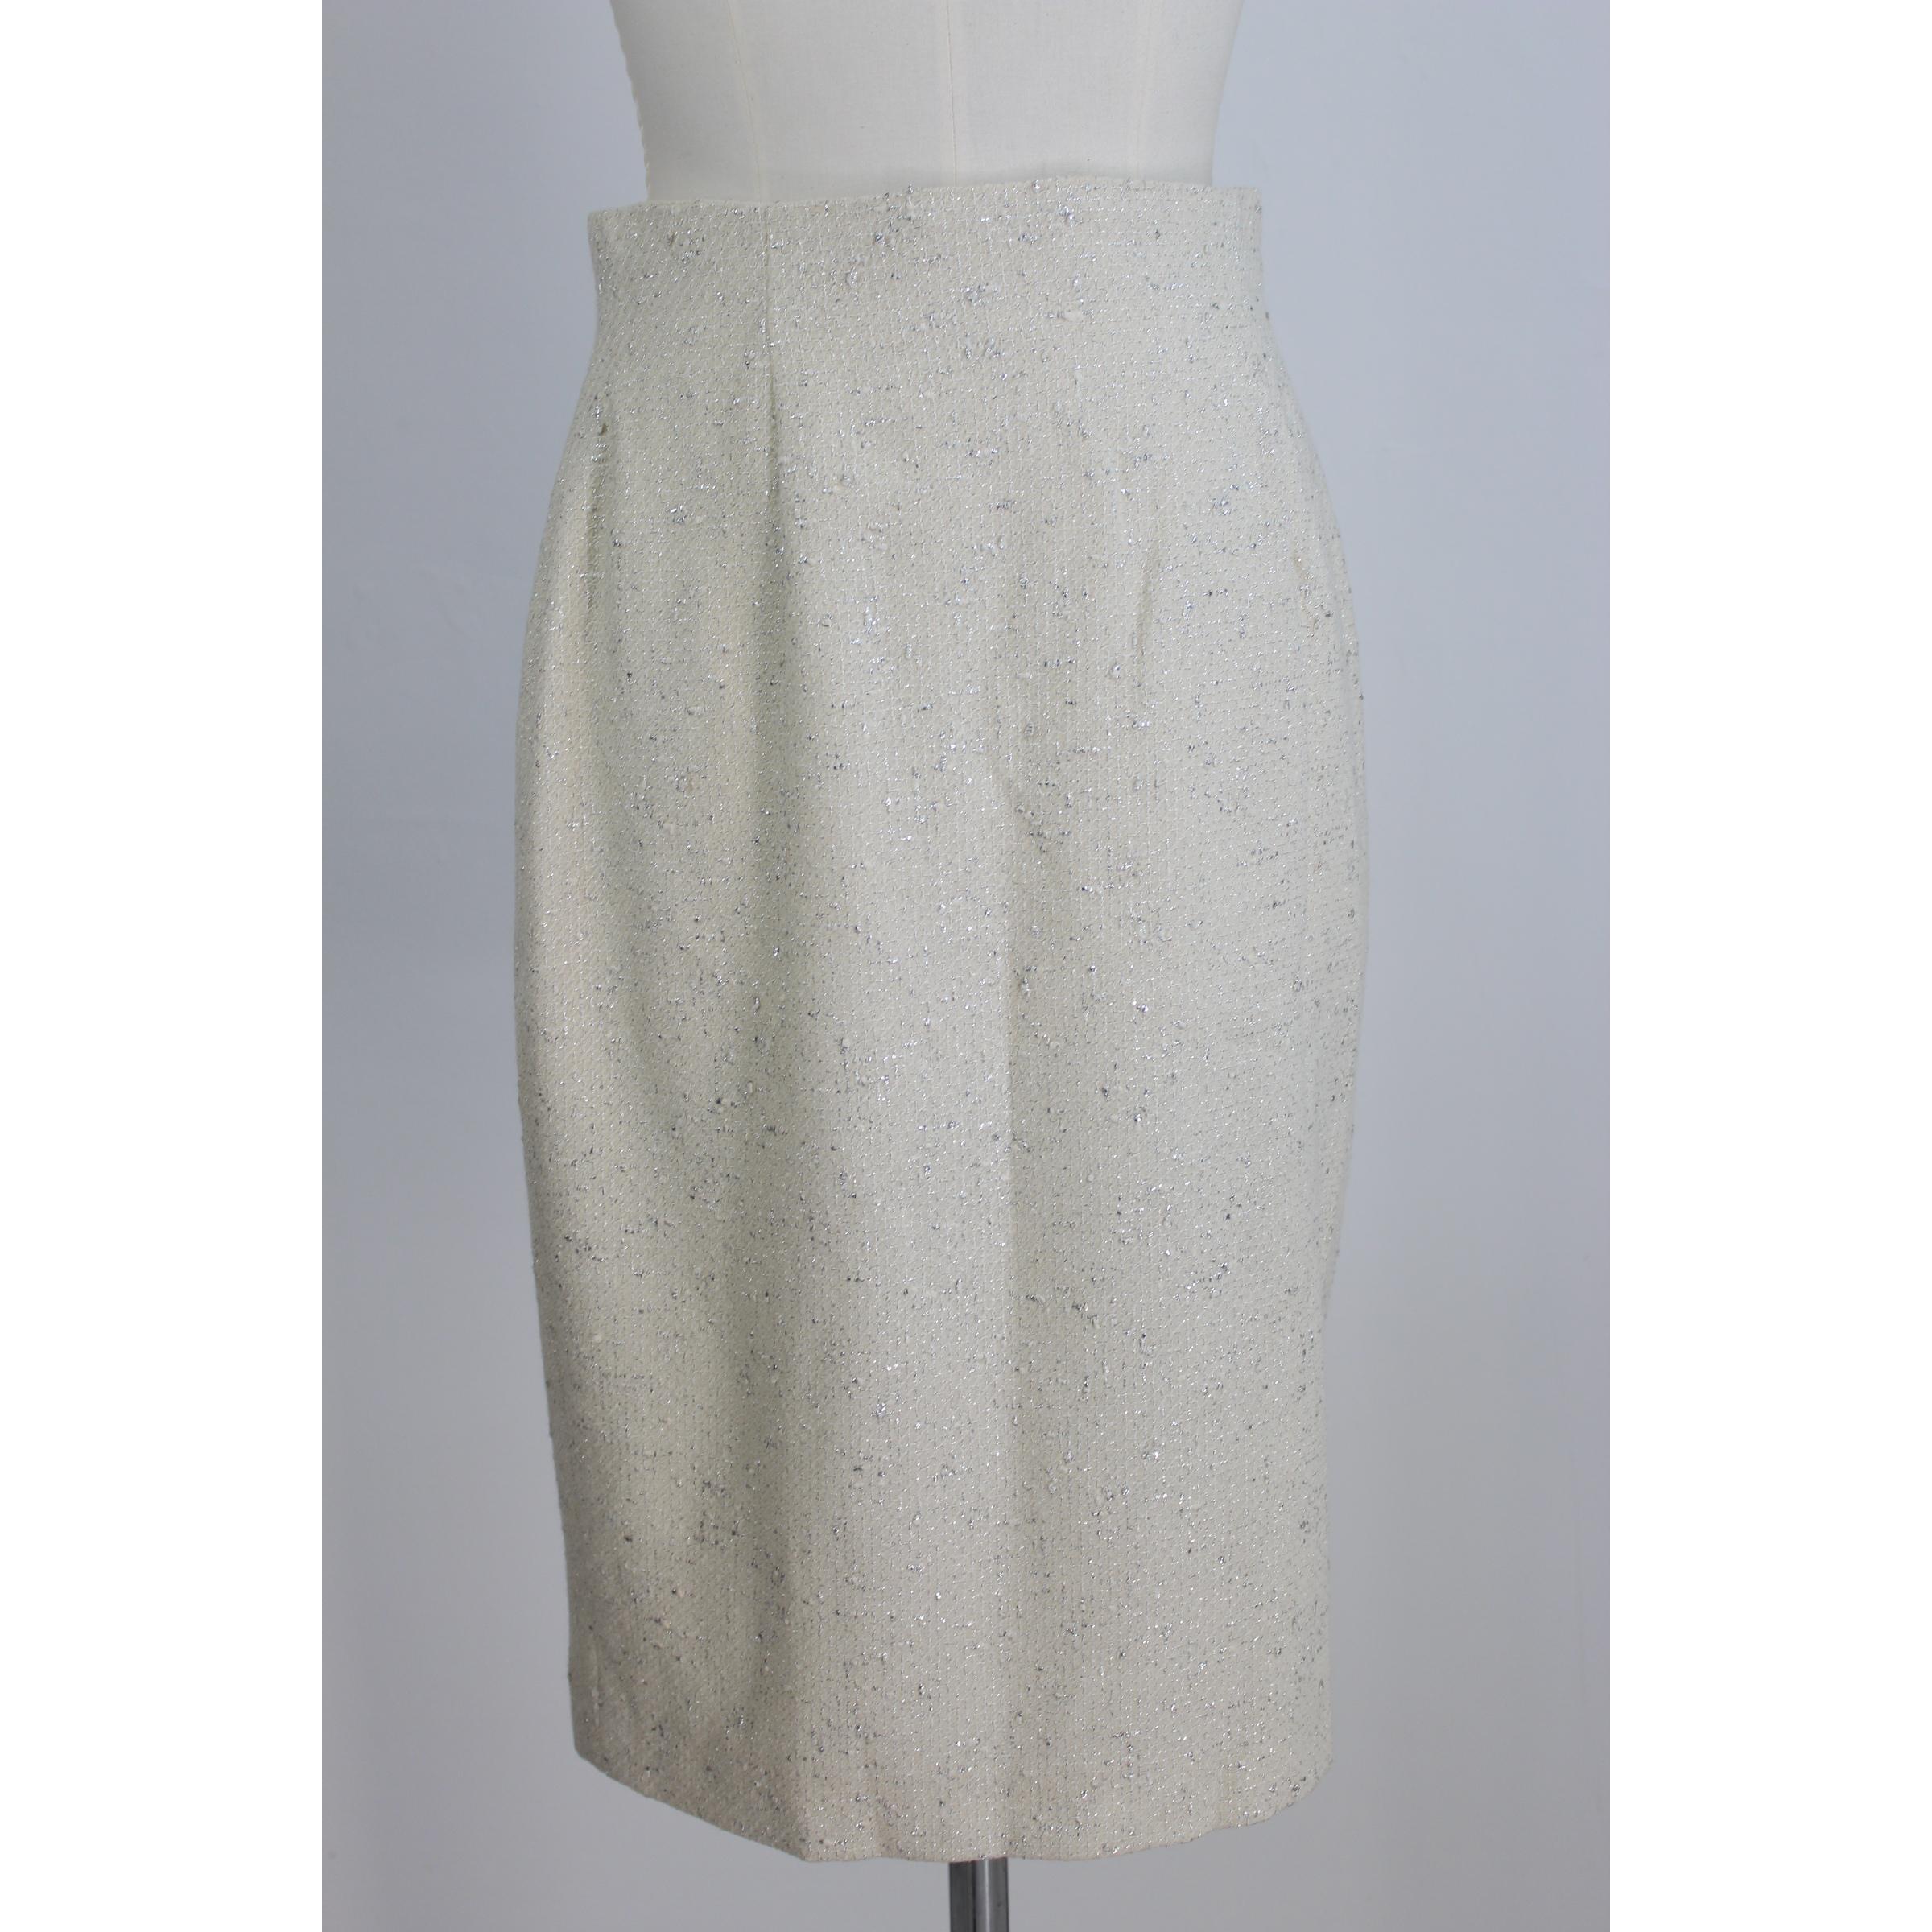 Annalisa Ferro White Silver Wool Cotton Elegant Suit Skirt In New Condition For Sale In Brindisi, Bt